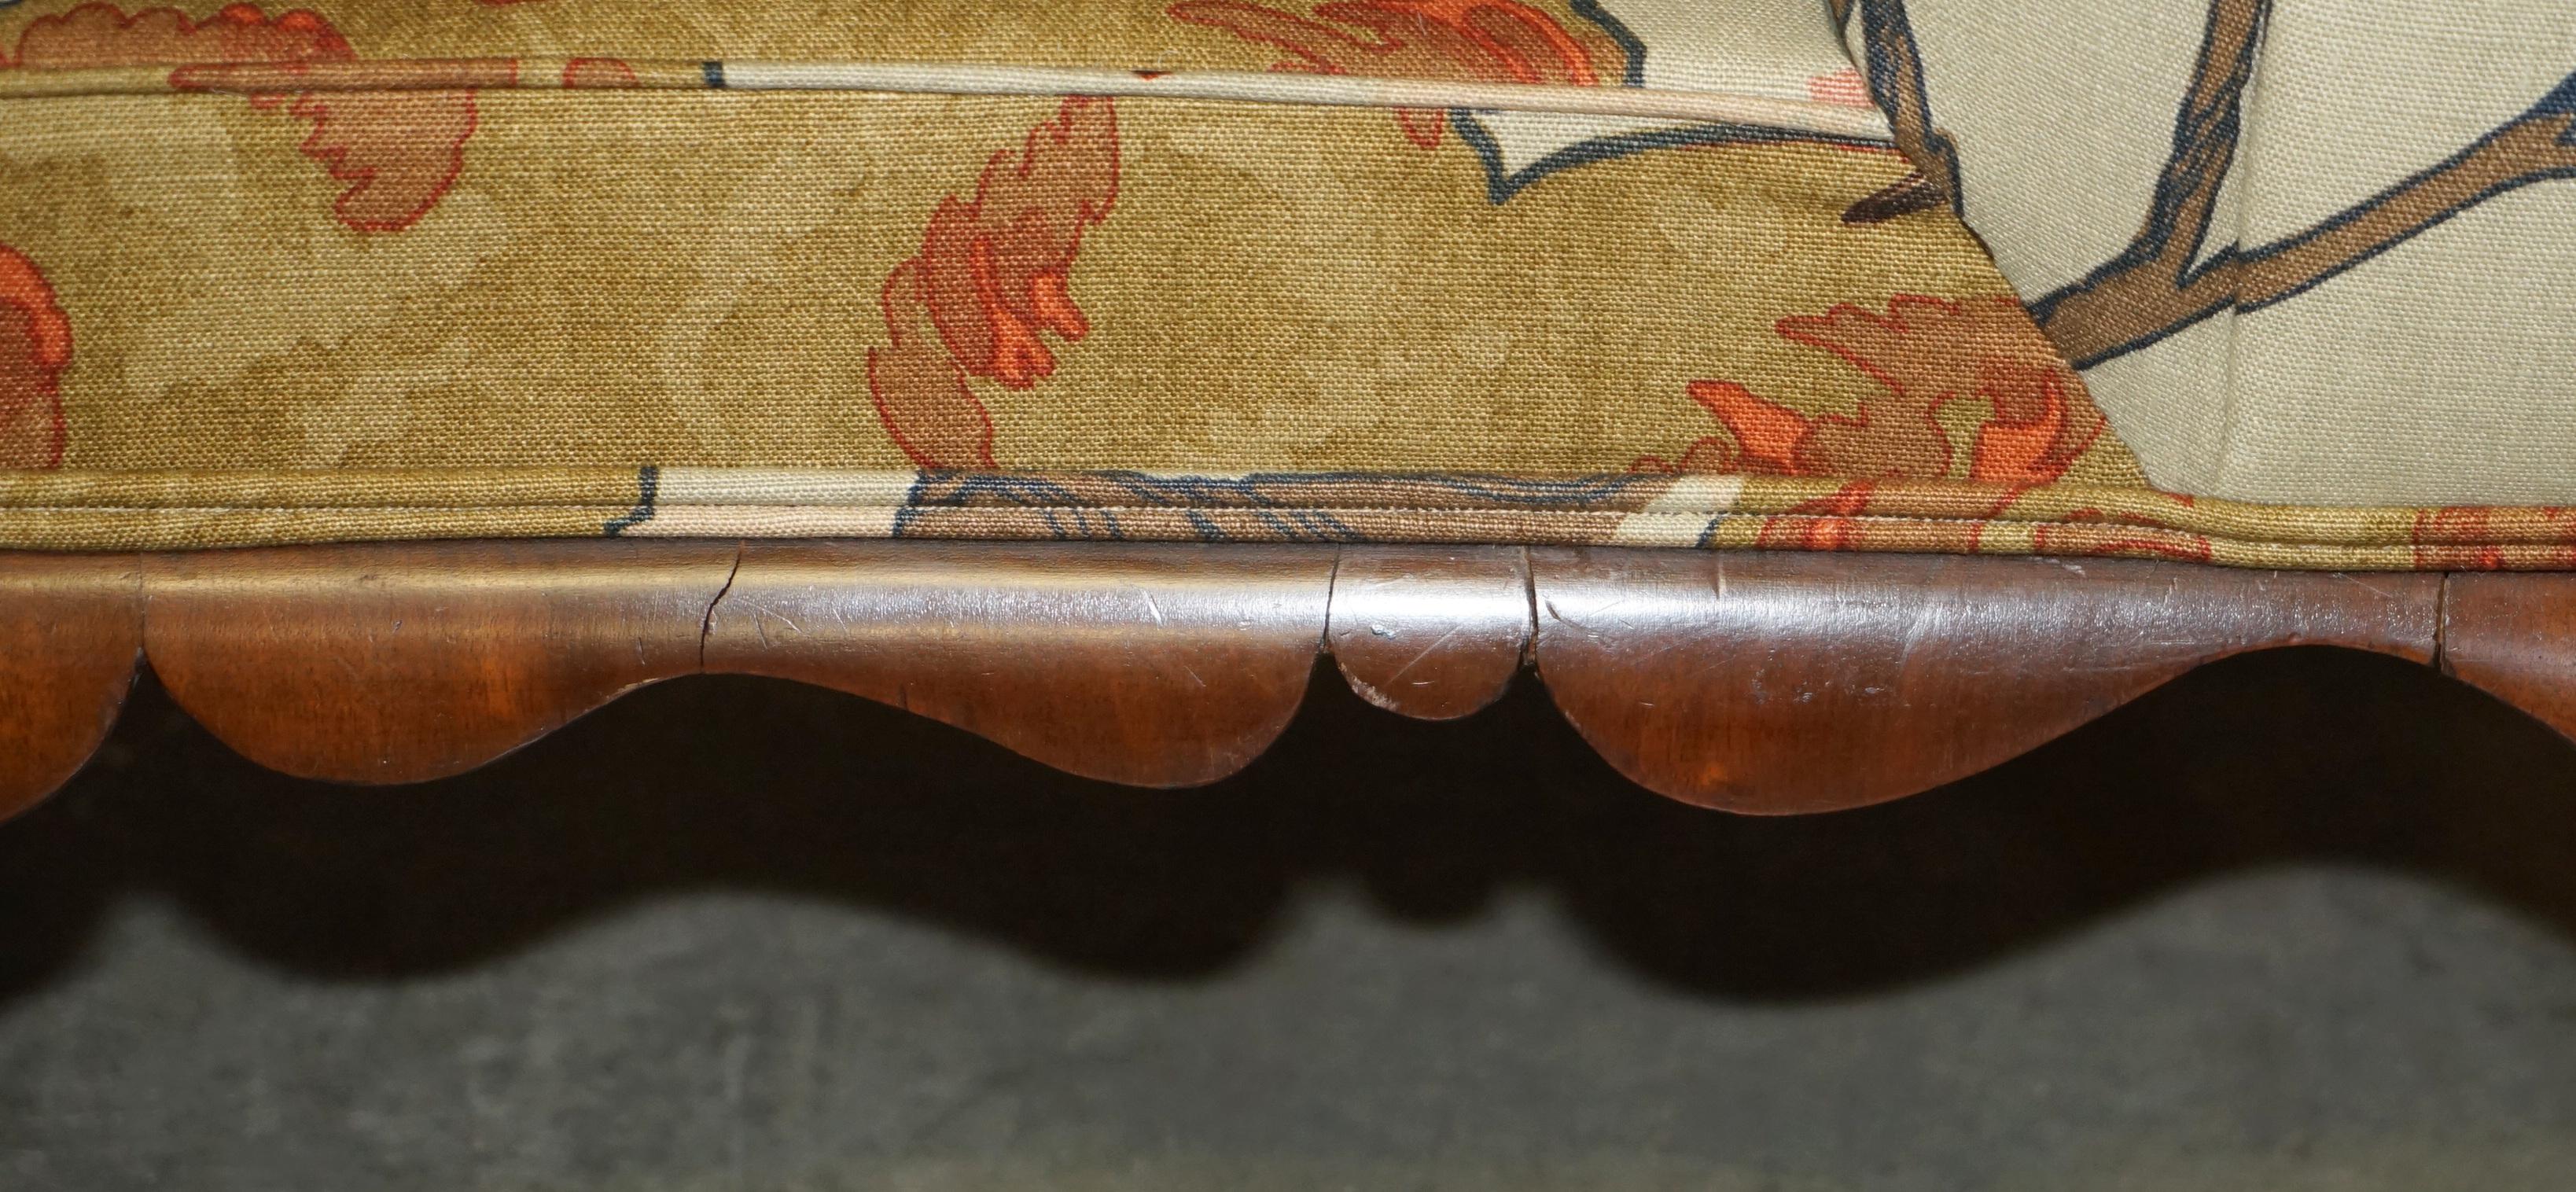 ANTIQUE CLAW & BALL FOOT HALL BENCH WiNDOW SEAT IN MULBERRY FLYING DUCK S FABRIC im Angebot 4